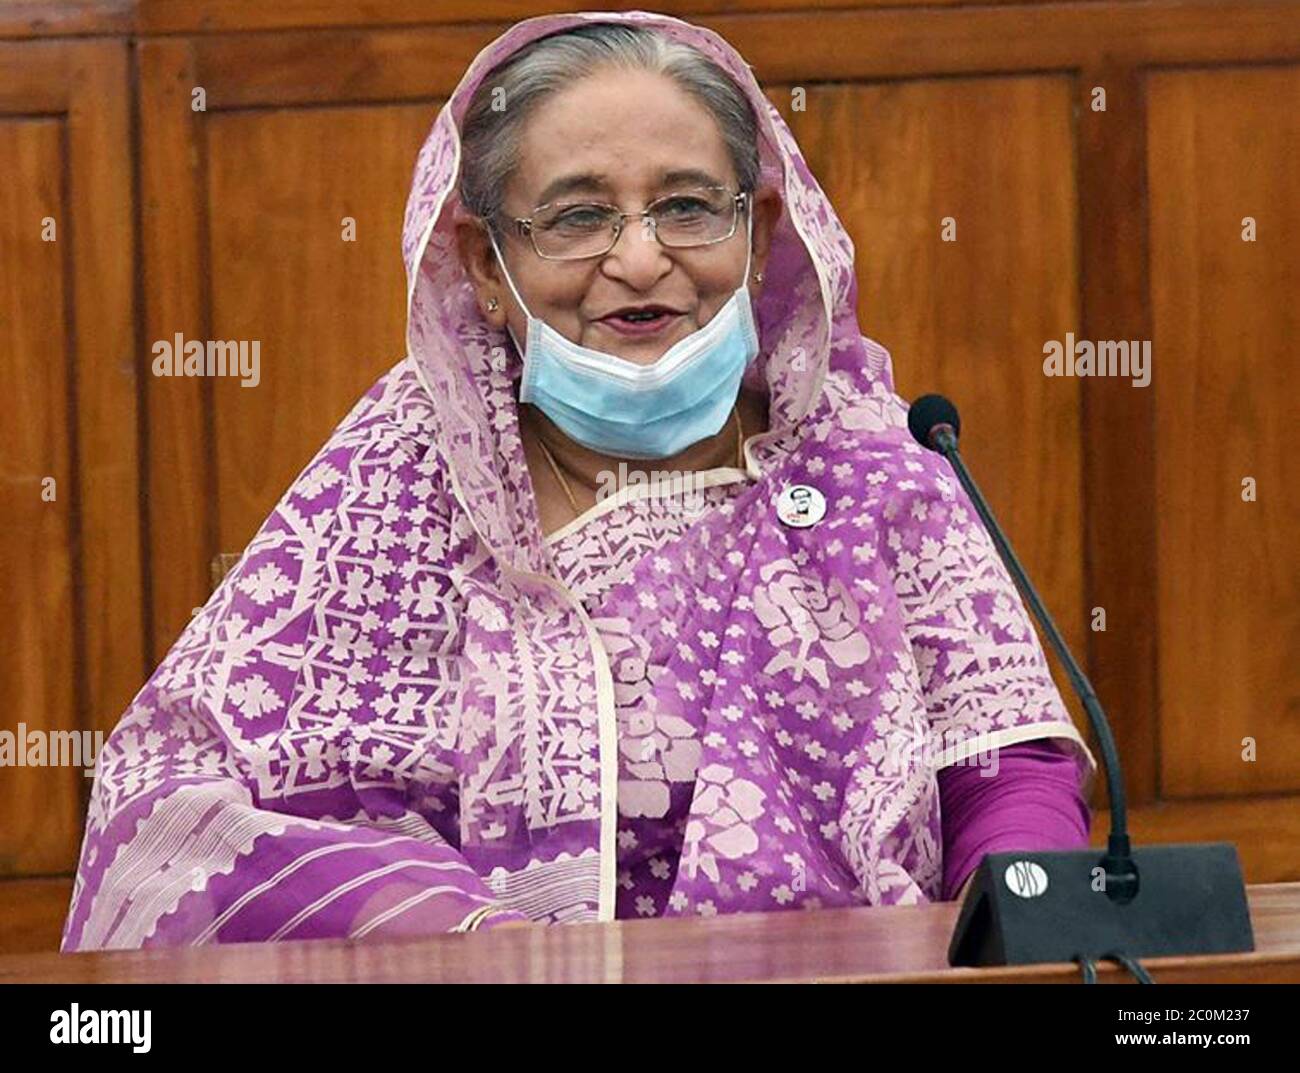 (200612) -- DHAKA, June 12, 2020 (Xinhua) -- Bangladeshi Prime Minister Sheikh Hasina speaks in parliament in Dhaka, Bangladesh on June 11, 2020. The Bangladeshi government has unveiled a record 5.68-trillion-taka (about 66.9 billion U.S. dollars) national budget for the 2020-21 fiscal year starting from July. (PID/Handout via Xinhua) Stock Photo